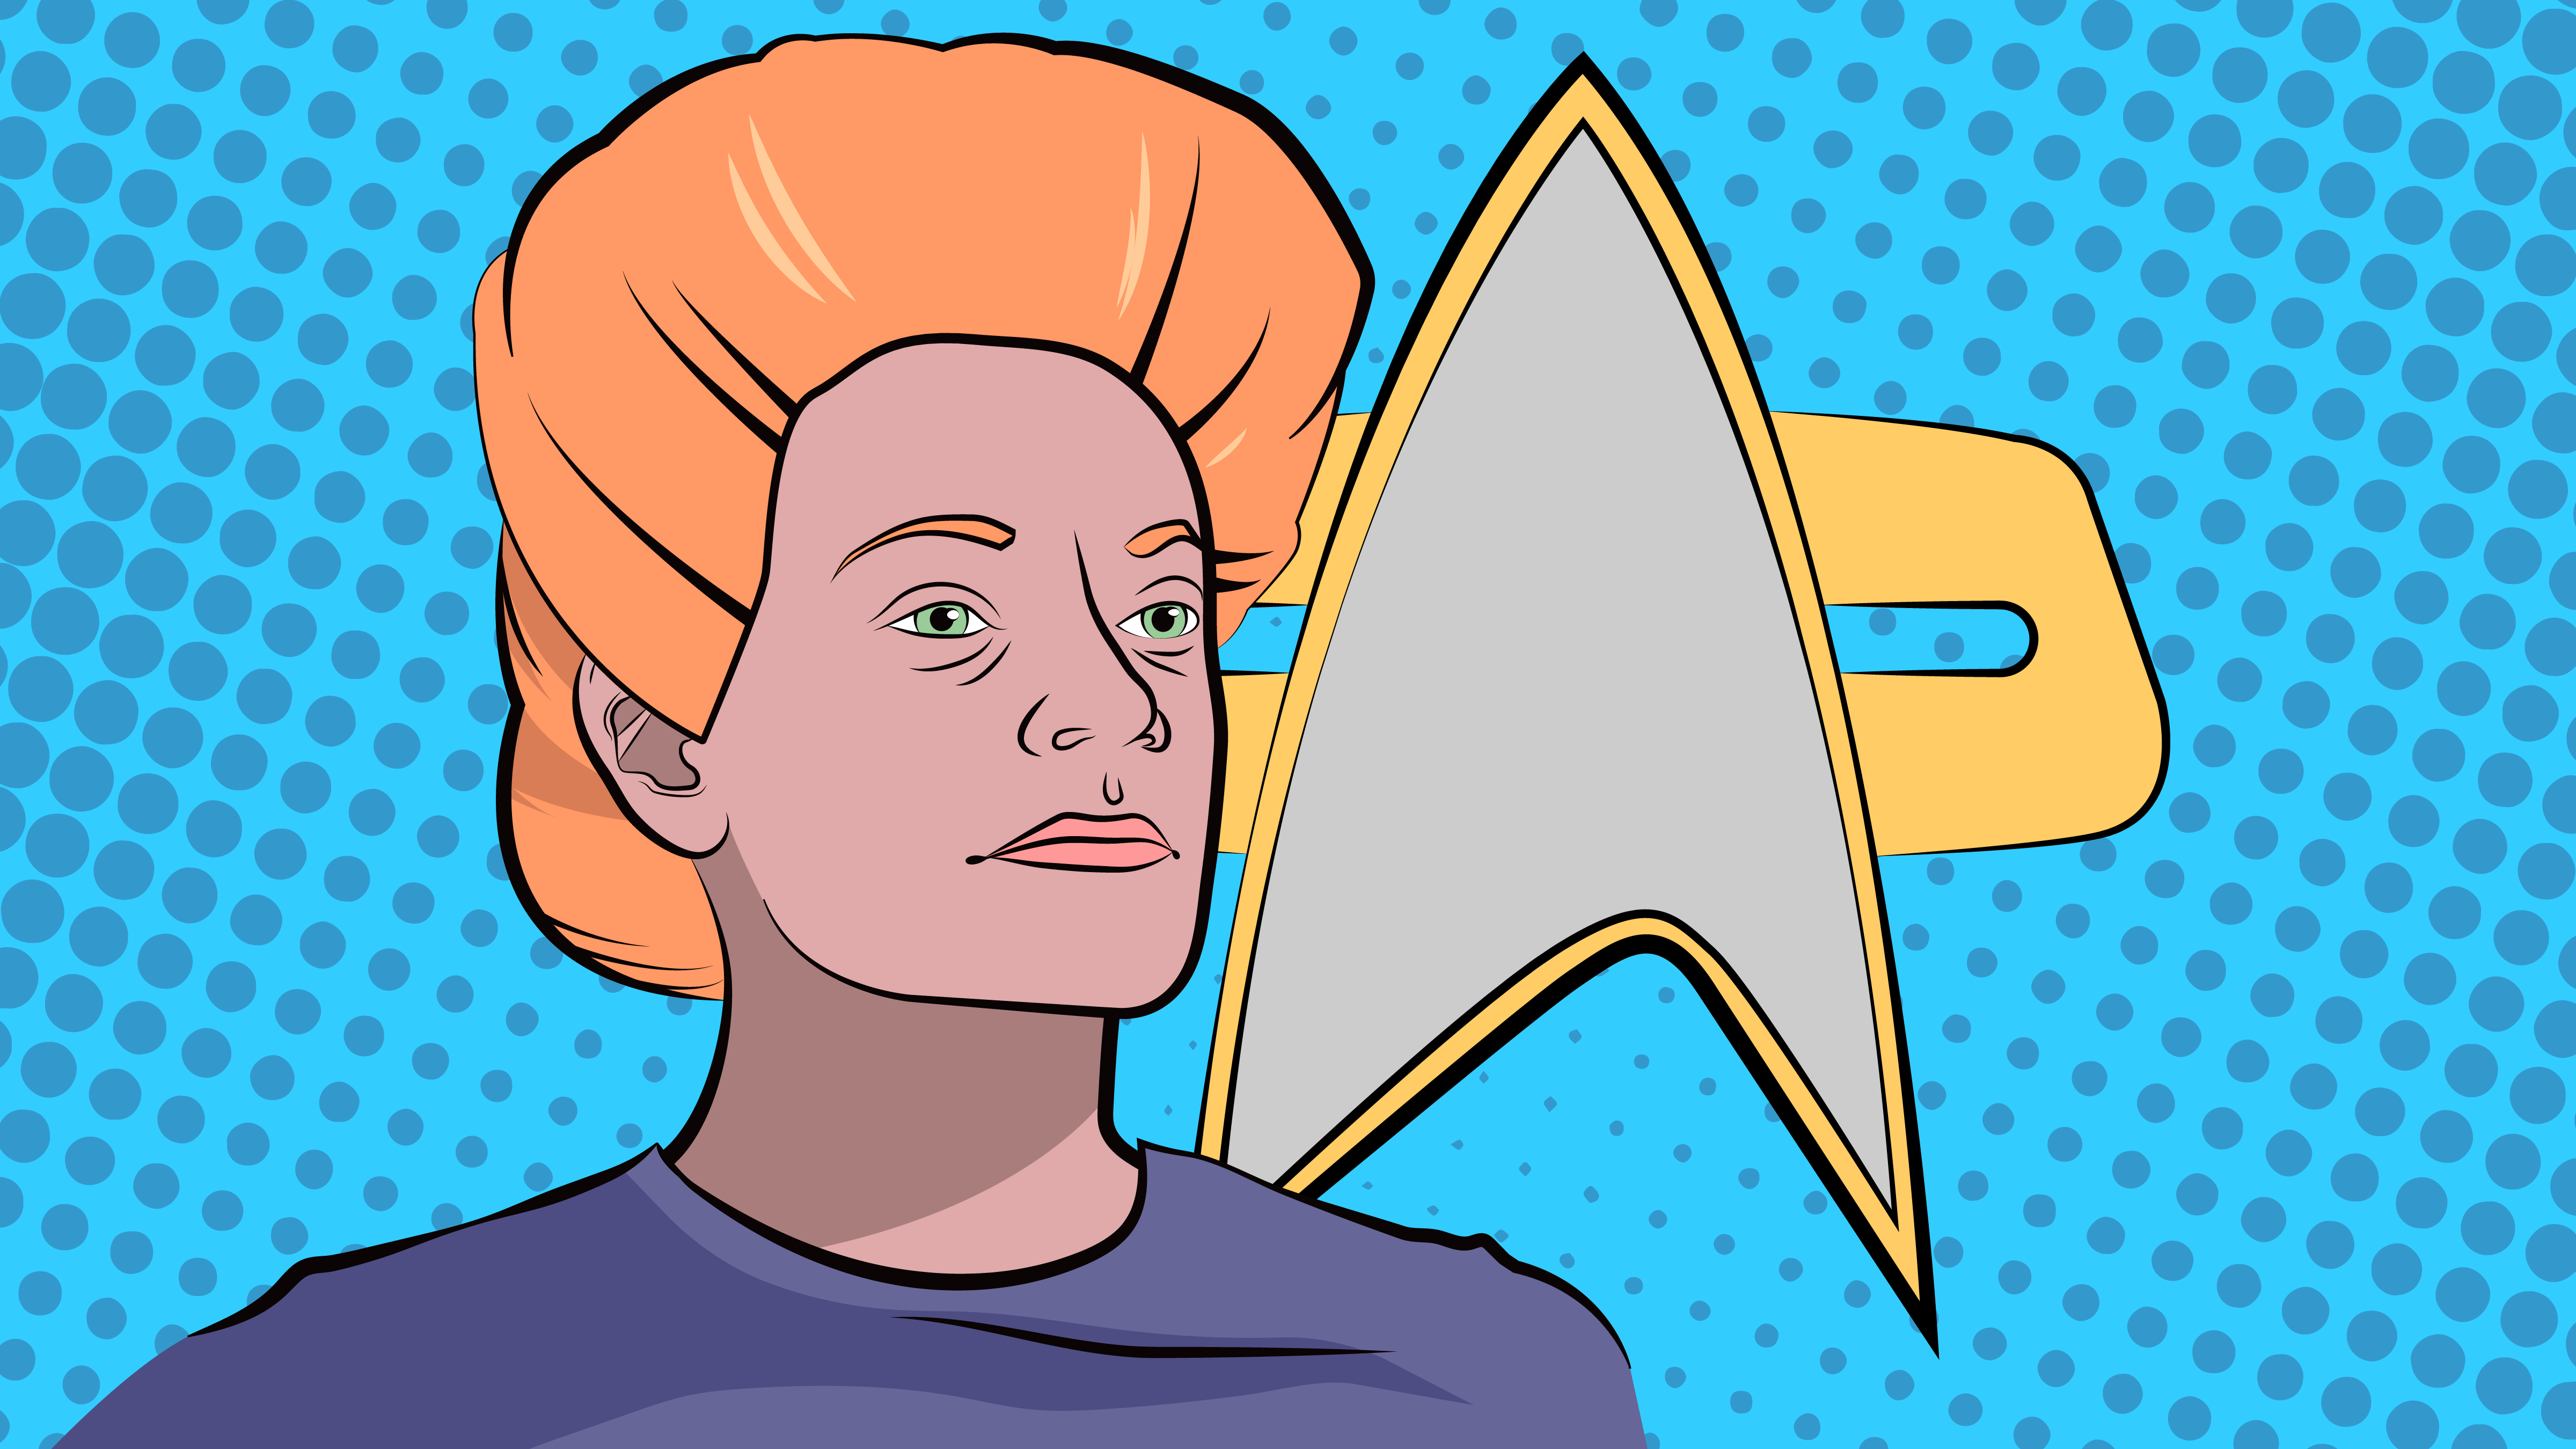 Pop Art-style image of a character from the Star Trek: Deep Space Nine episode Sanctuary, featuring a woman in profile and a Starfleet insignia.